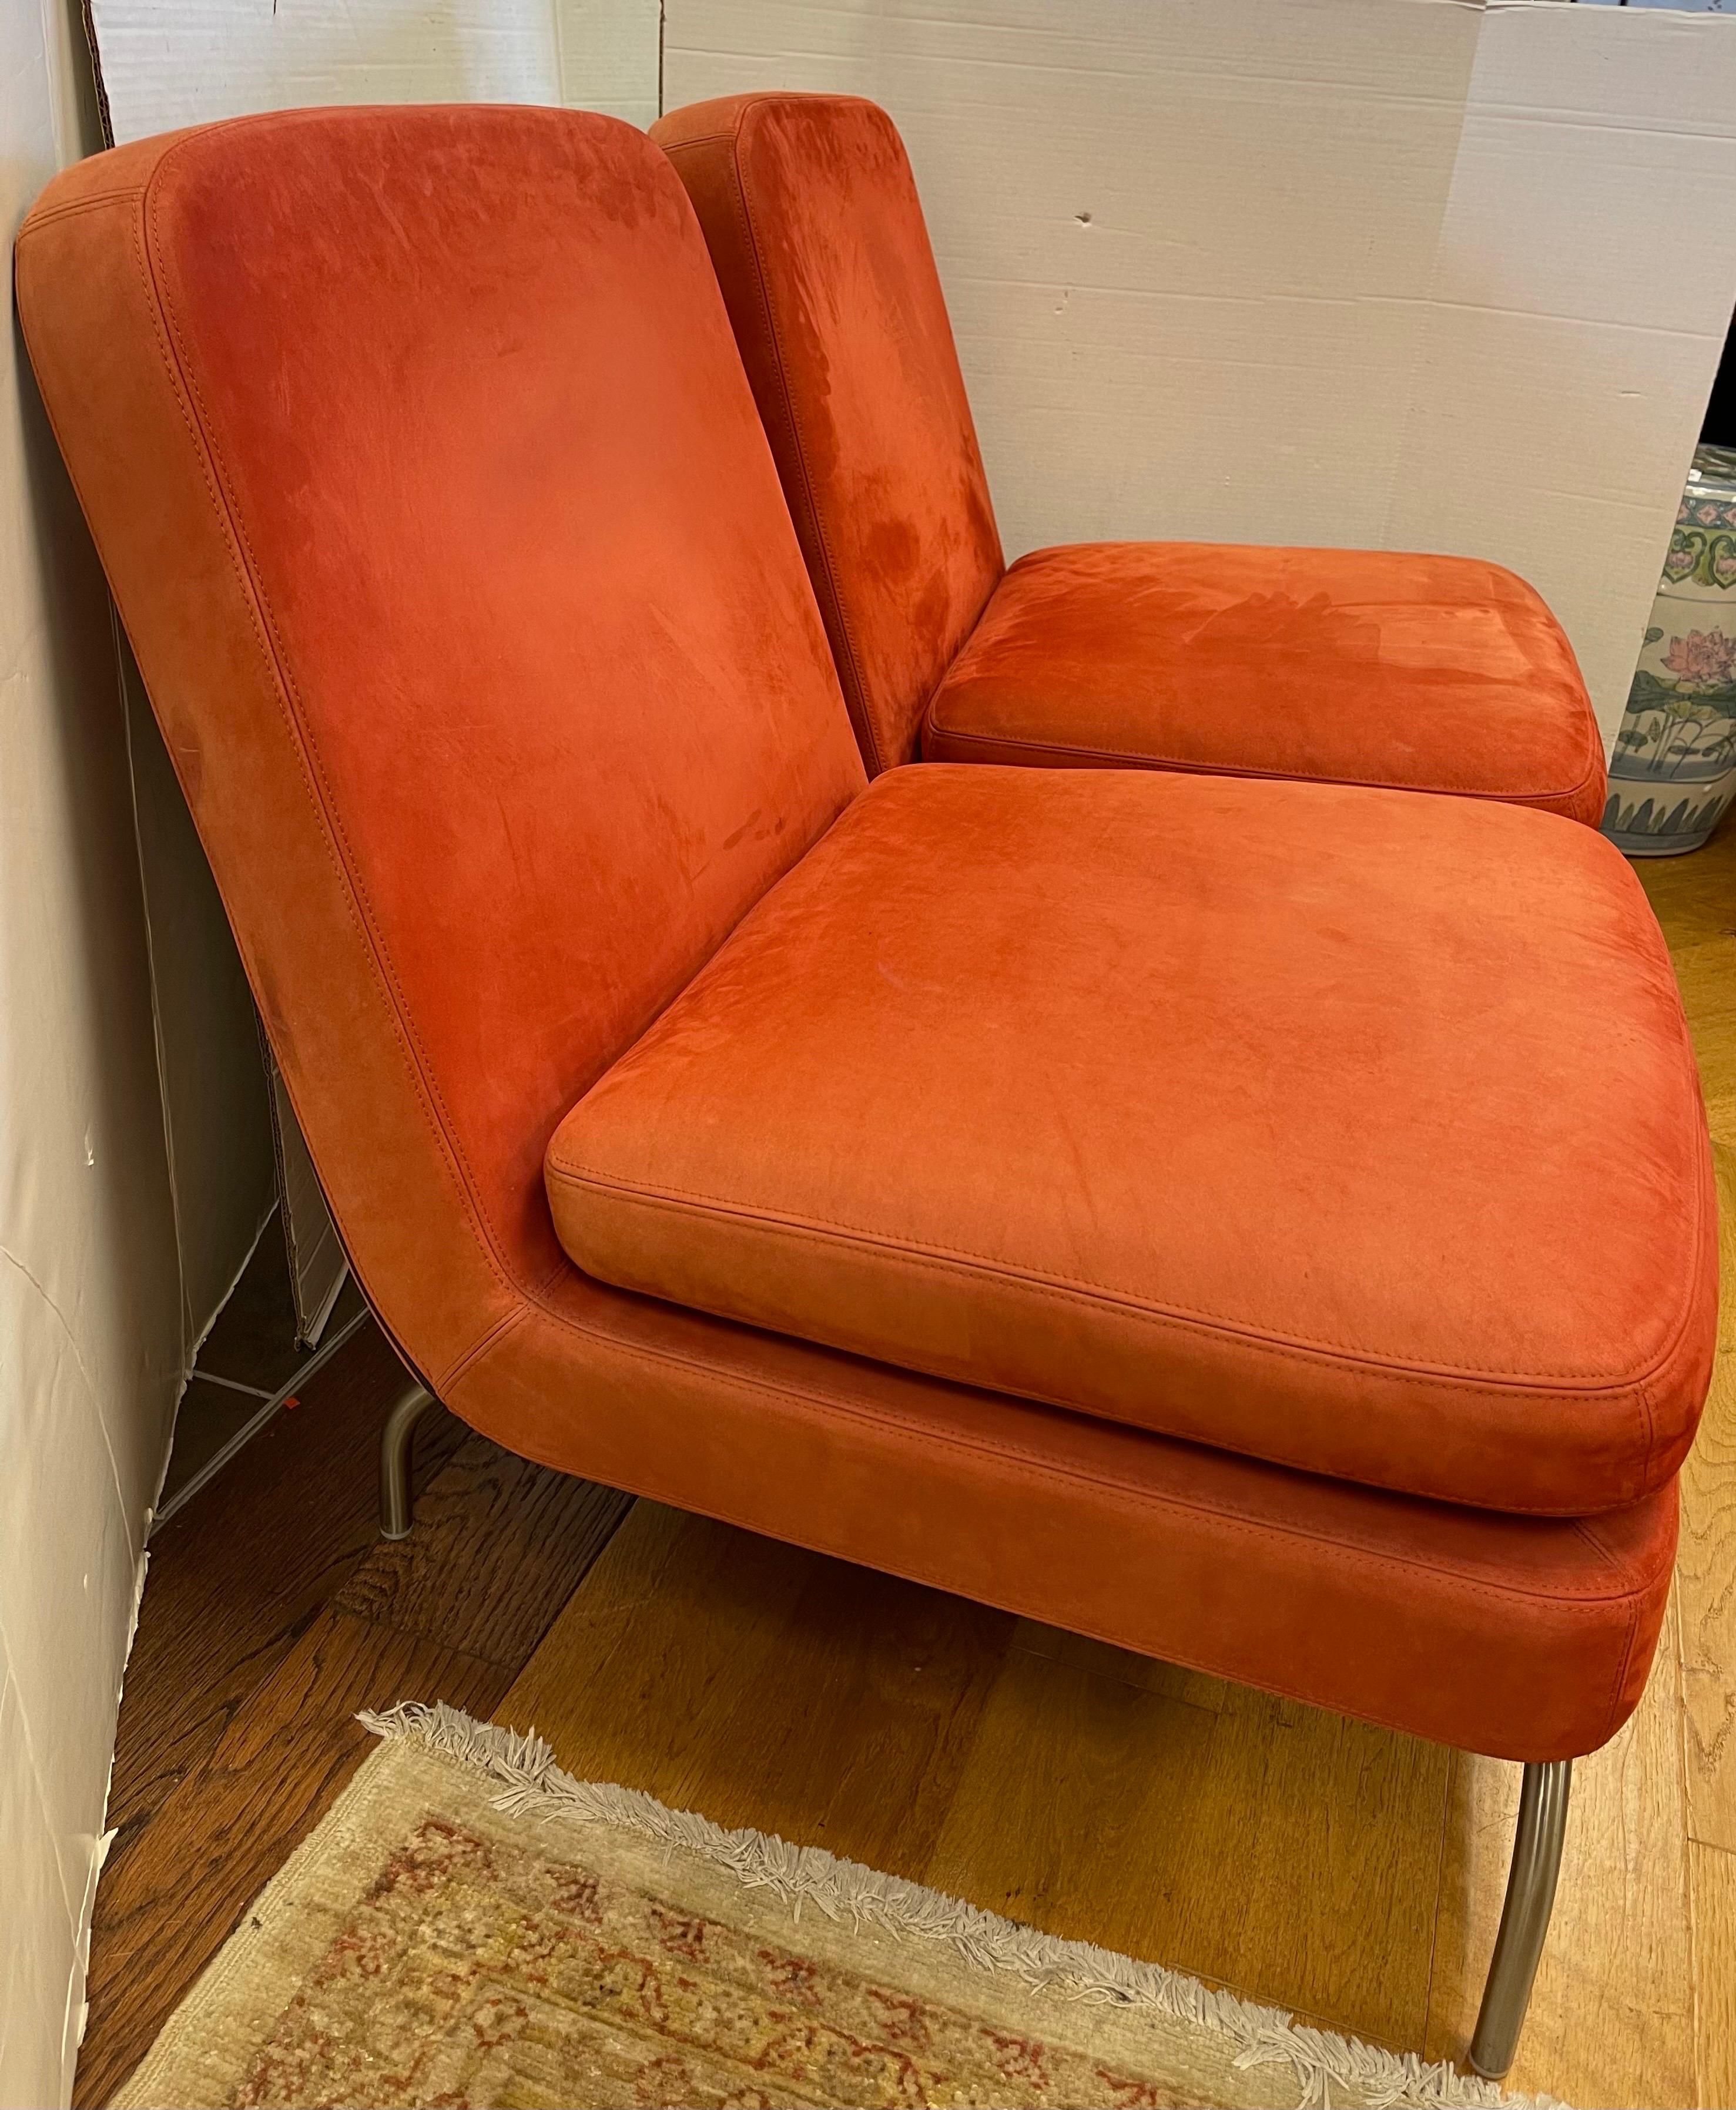 Pair of Signed Minotti Gigi Radice Designed Orange Suede Lounge Chairs Italy In Good Condition In West Hartford, CT